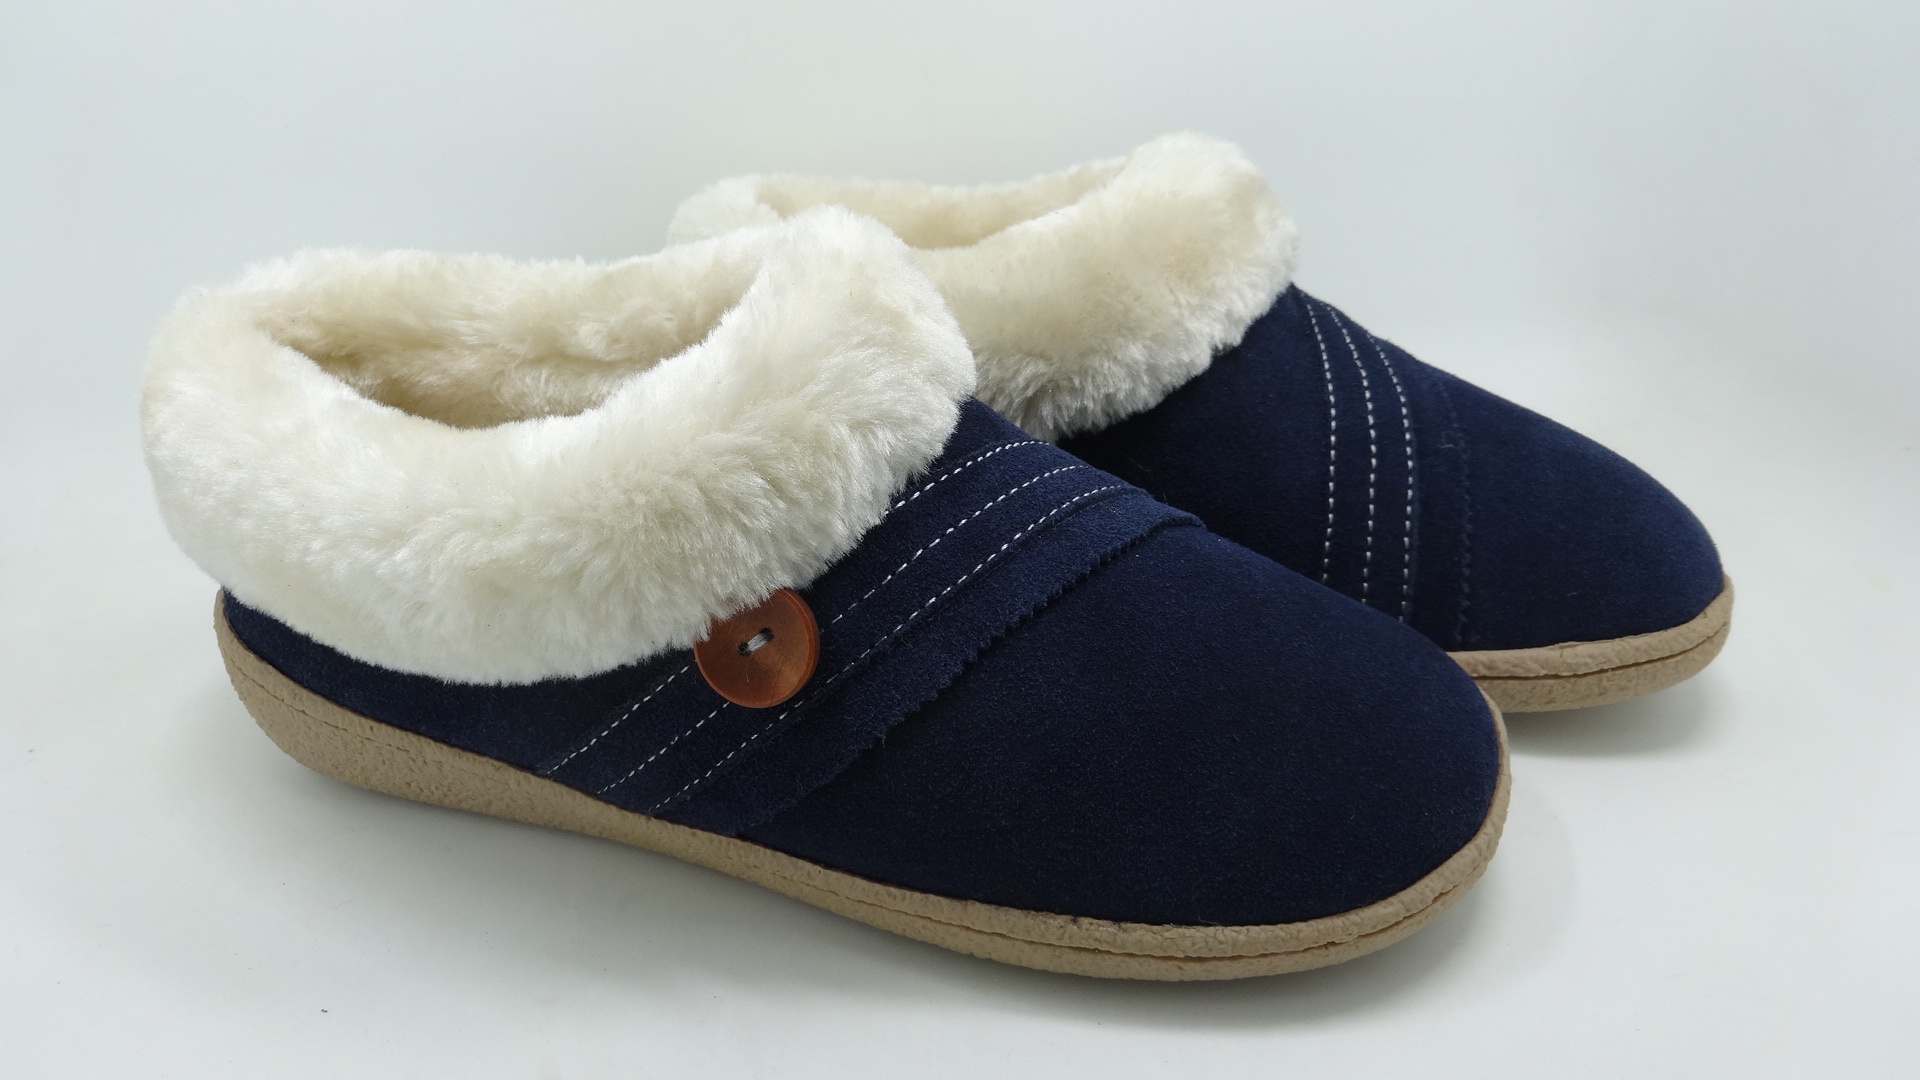 Top Quotes for Outdoor Winter Slippers to Keep Your Feet Warm and Cozy